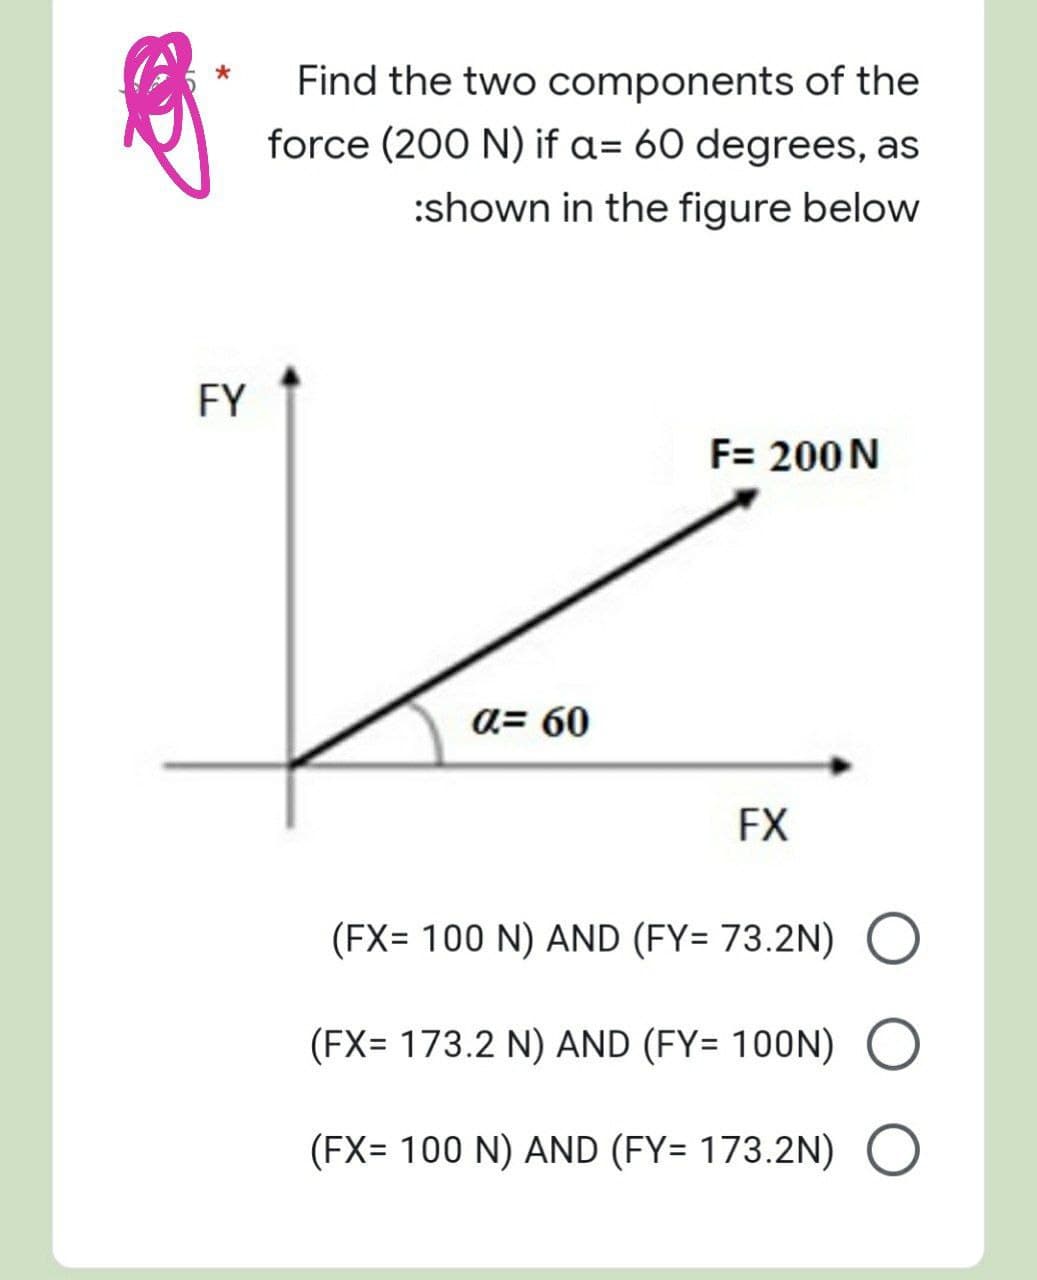 FY
Find the two components of the
force (200 N) if a= 60 degrees, as
:shown in the figure below
F= 200 N
α= 60
FX
(FX= 100 N) AND (FY= 73.2N) O
(FX= 173.2 N) AND (FY= 100N) O
(FX= 100 N) AND (FY= 173.2N) O